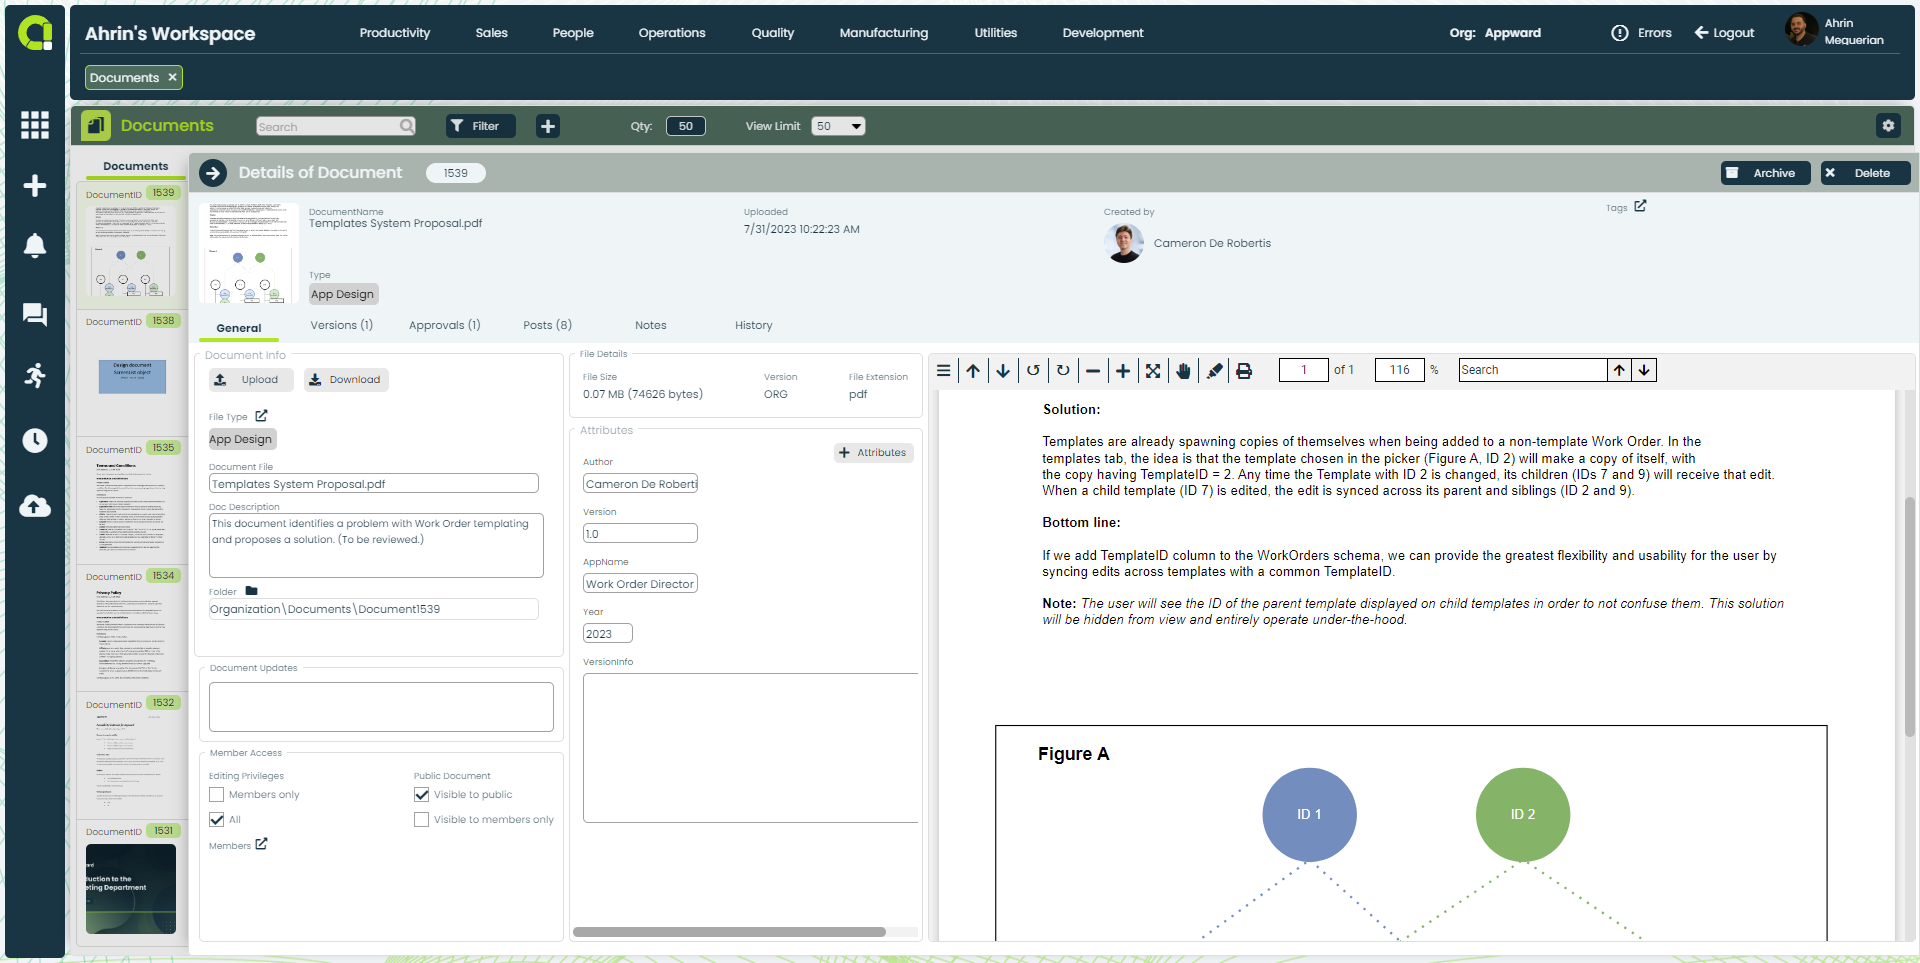 Appward Agile Project Management Software Centralized Document Control System